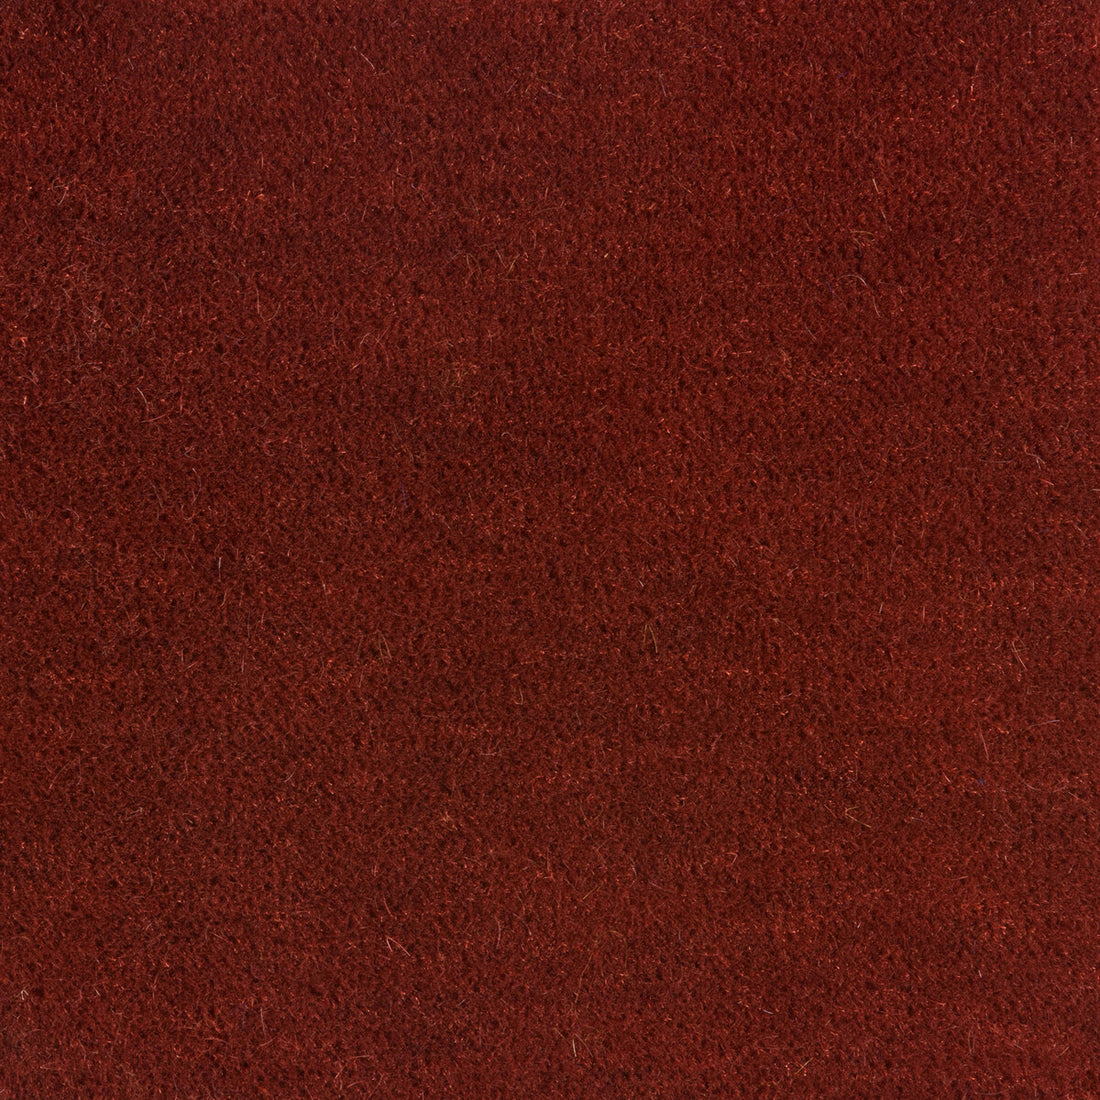 Bachelor Mohair fabric in russet color - pattern 8014101.22.0 - by Brunschwig &amp; Fils